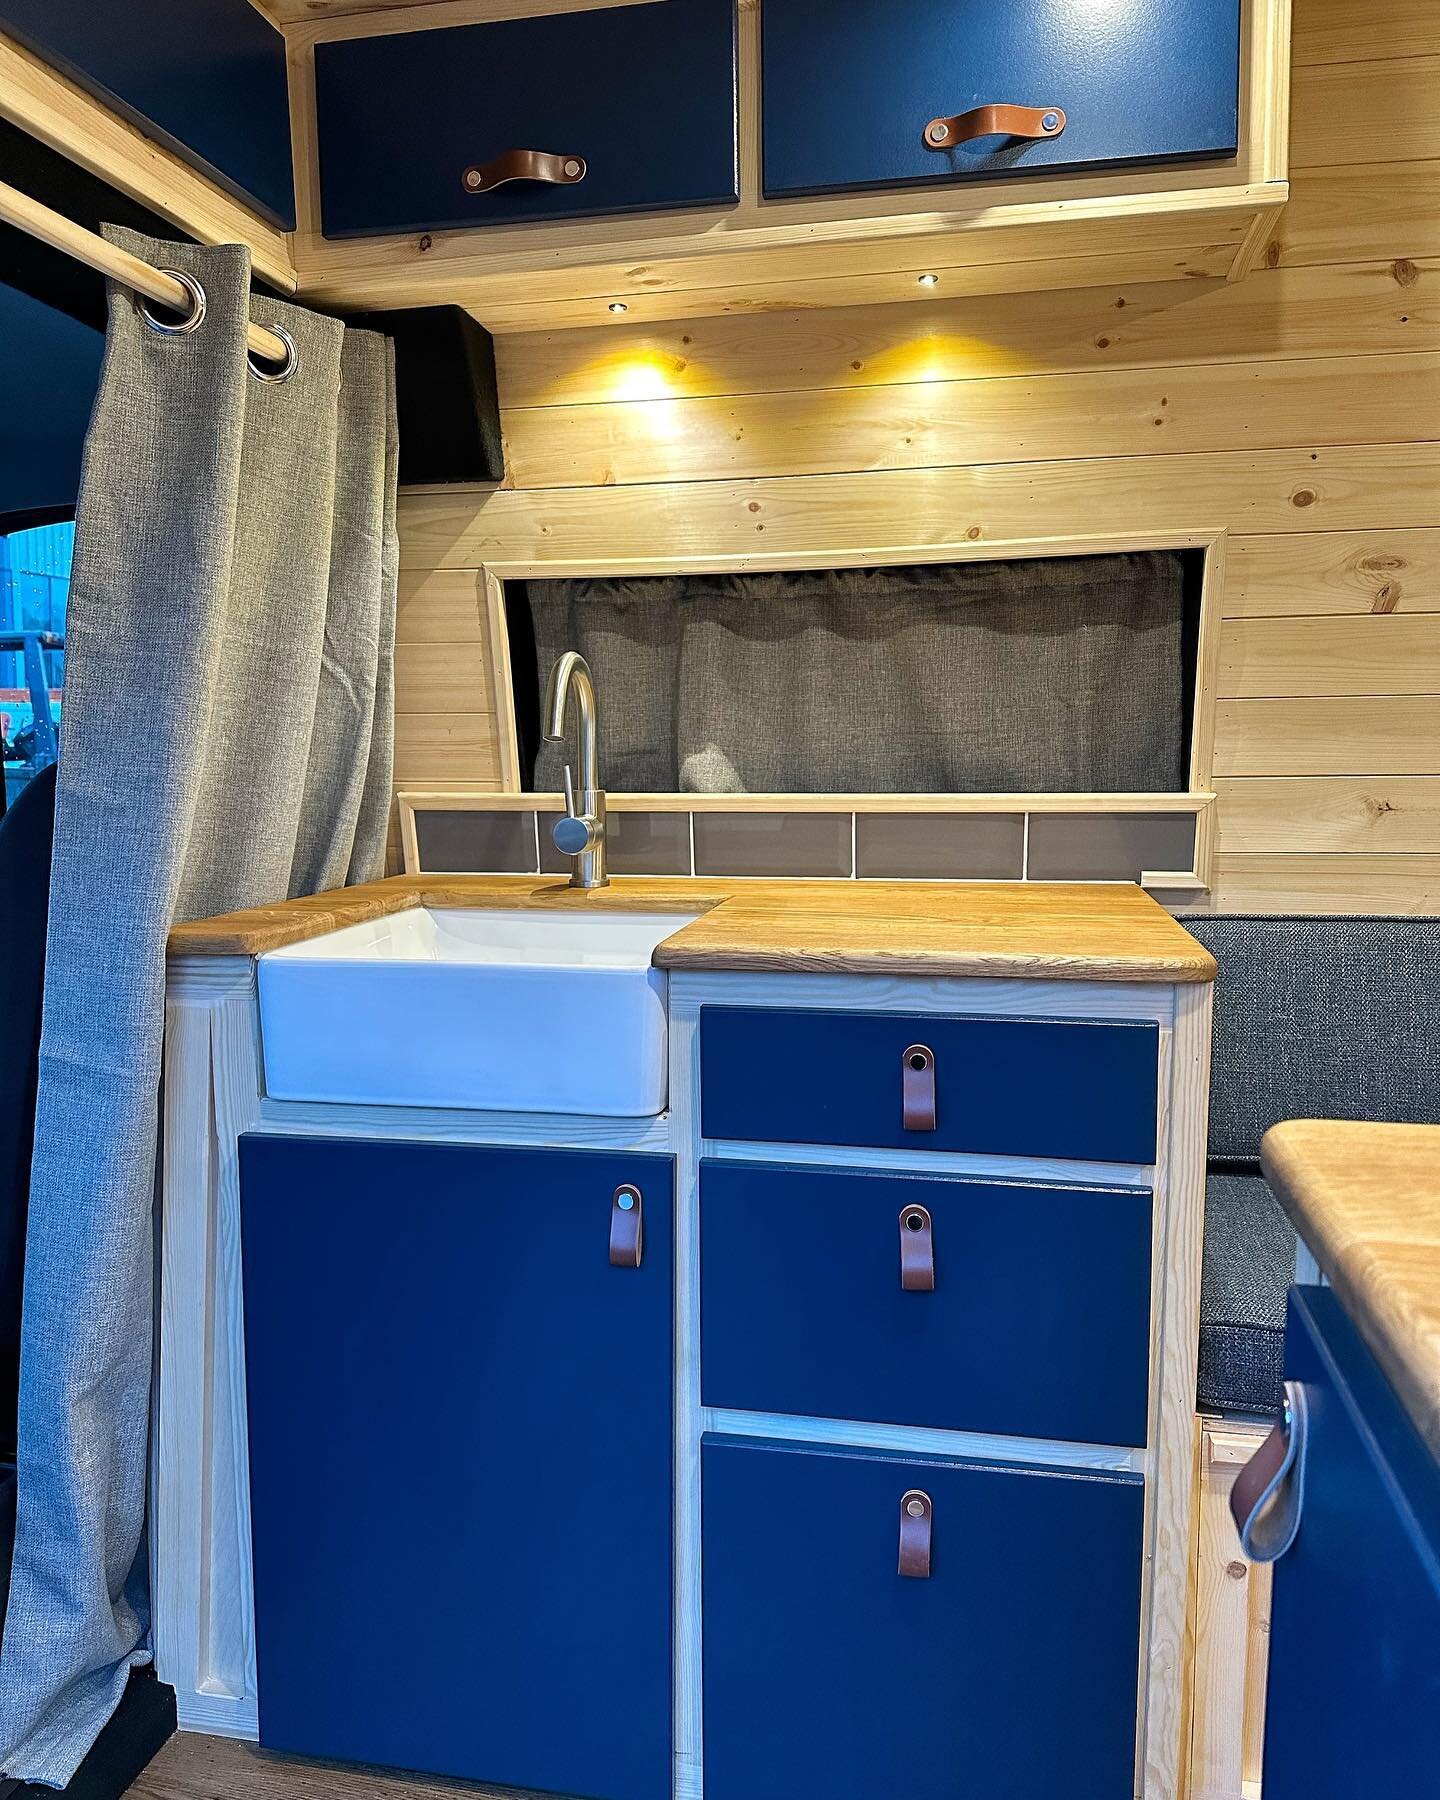 a spot on the grid for Miss Tiggy 💙

A Ford Transit Custom LWB high roof van with bags of storage, lots of lounging space &amp; a cute compact kitchen! ✨

#vanlife #vanlifediaries #vanlifemovement #vanlifeeurope #vanlifedream #vanlifedreams #camper 